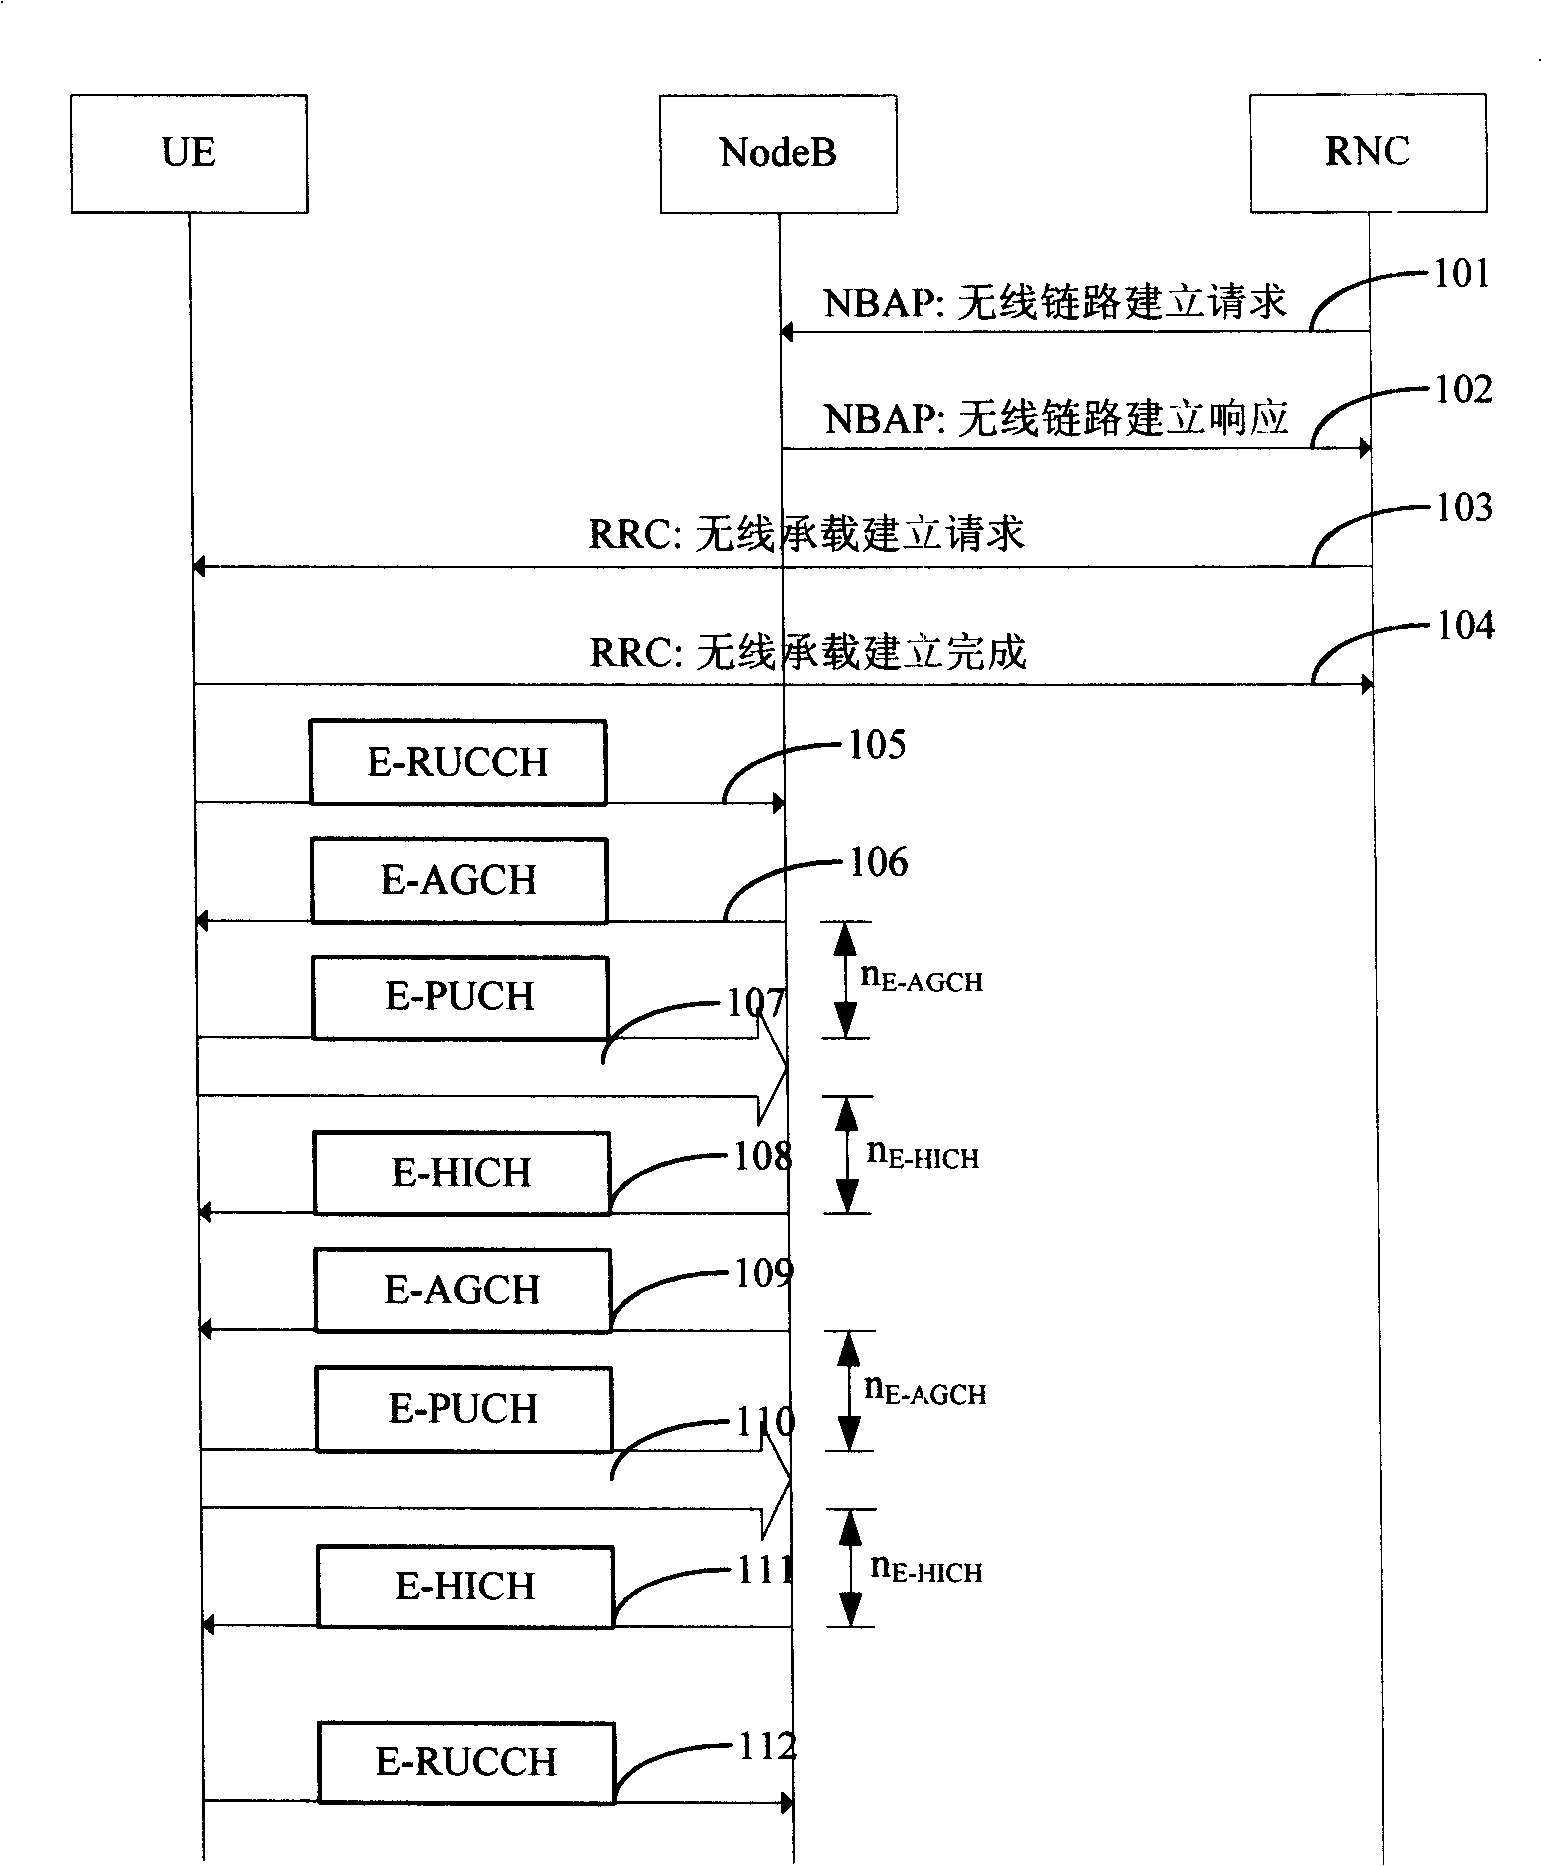 Method for reinforcing ascending link and implementing fast switch-over